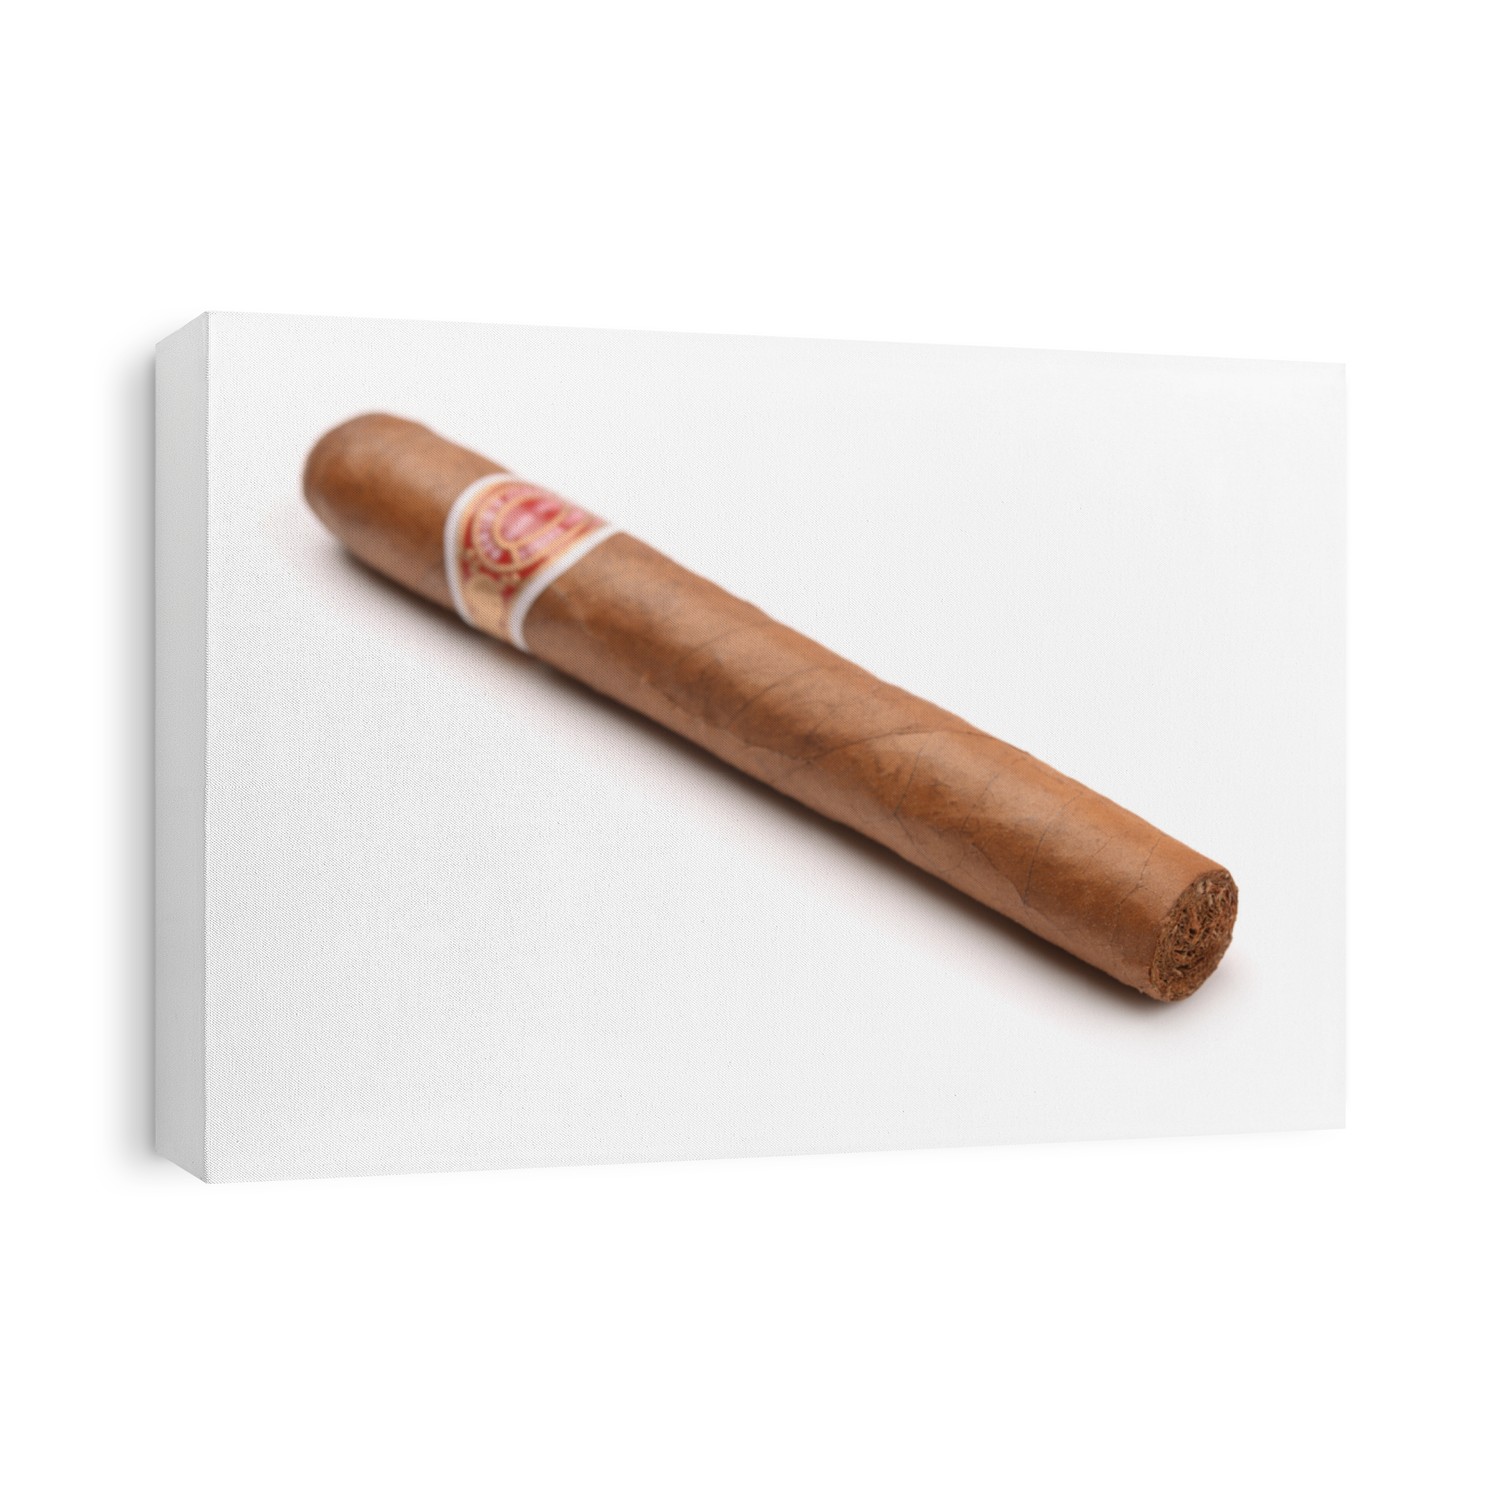 Cuban cigar isolated on white